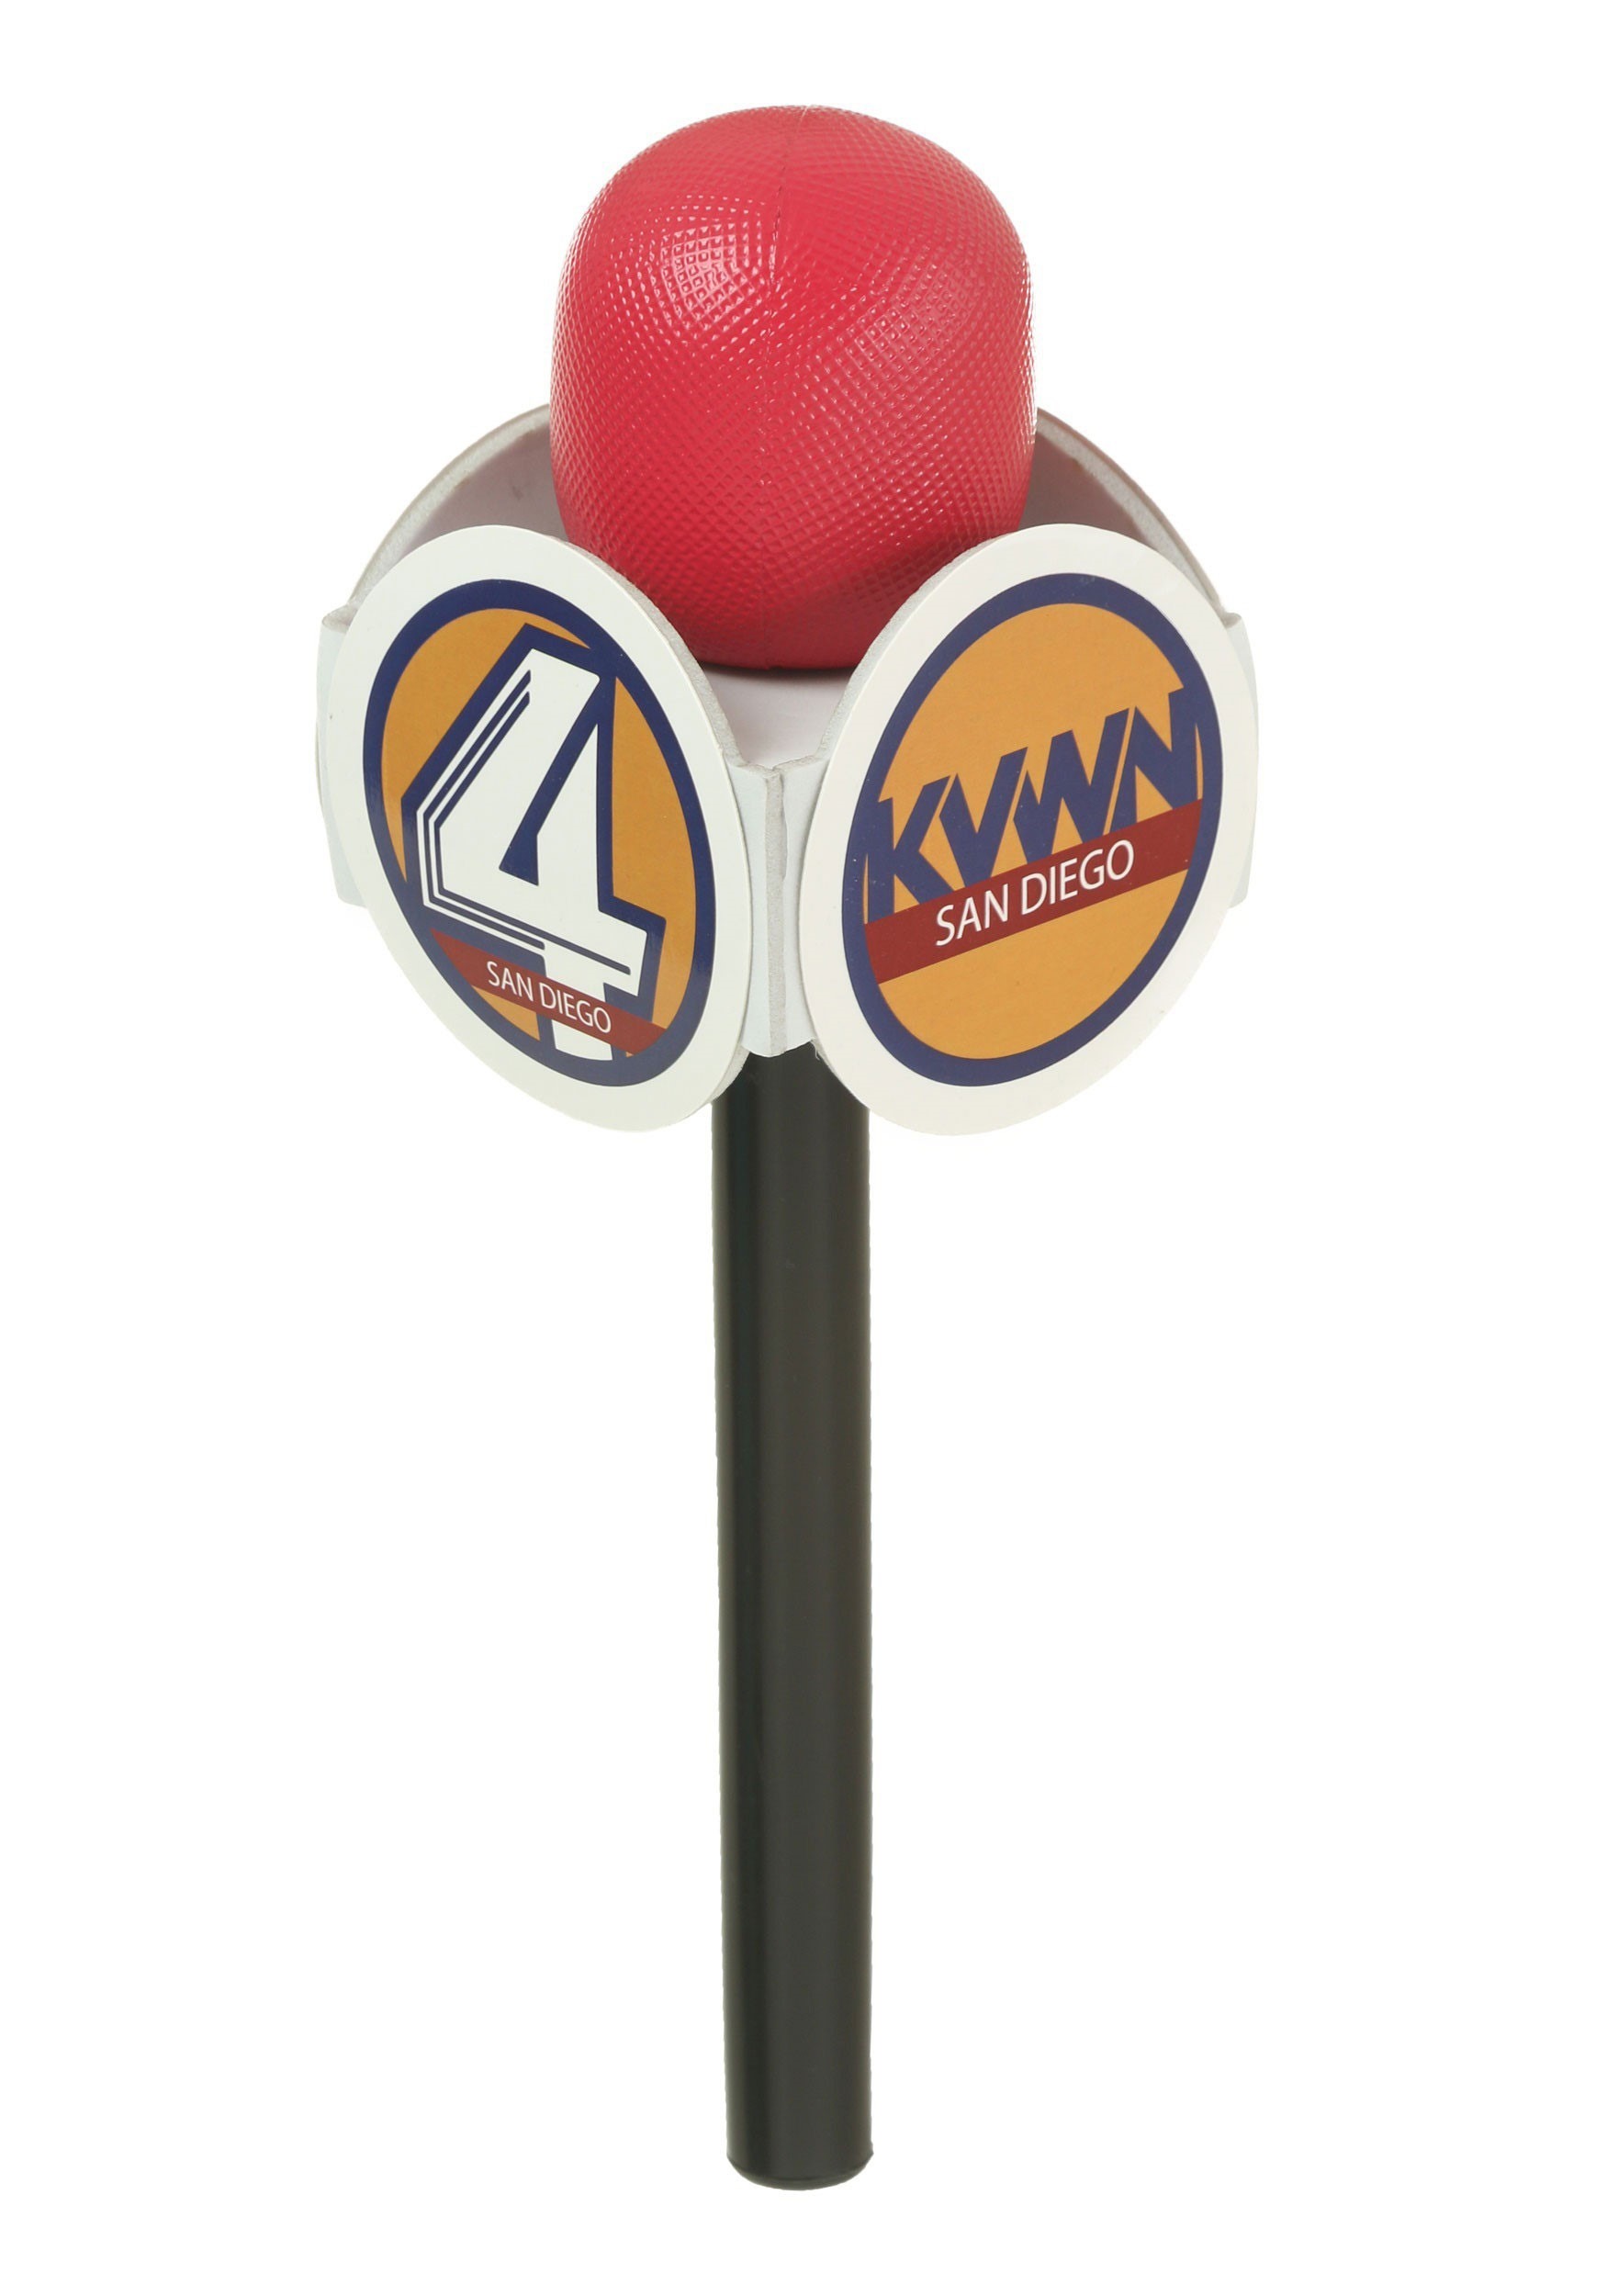 Anchorman Channel 4 News Microphone Prop , Costume Accessories